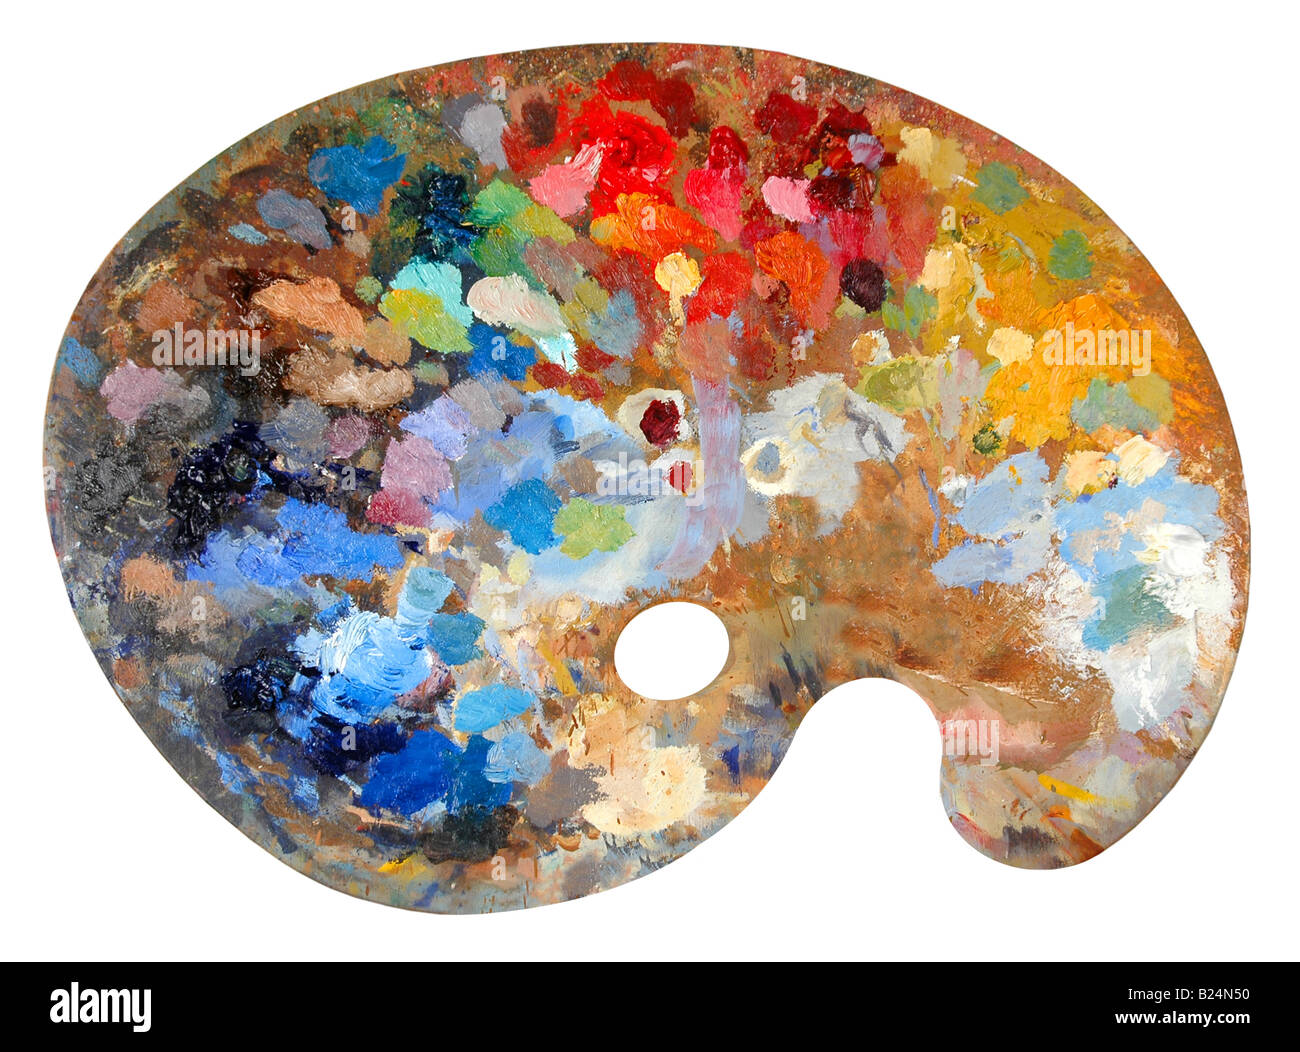 Artist s palette with multiple colors isolated over a white background  Stock Photo - Alamy